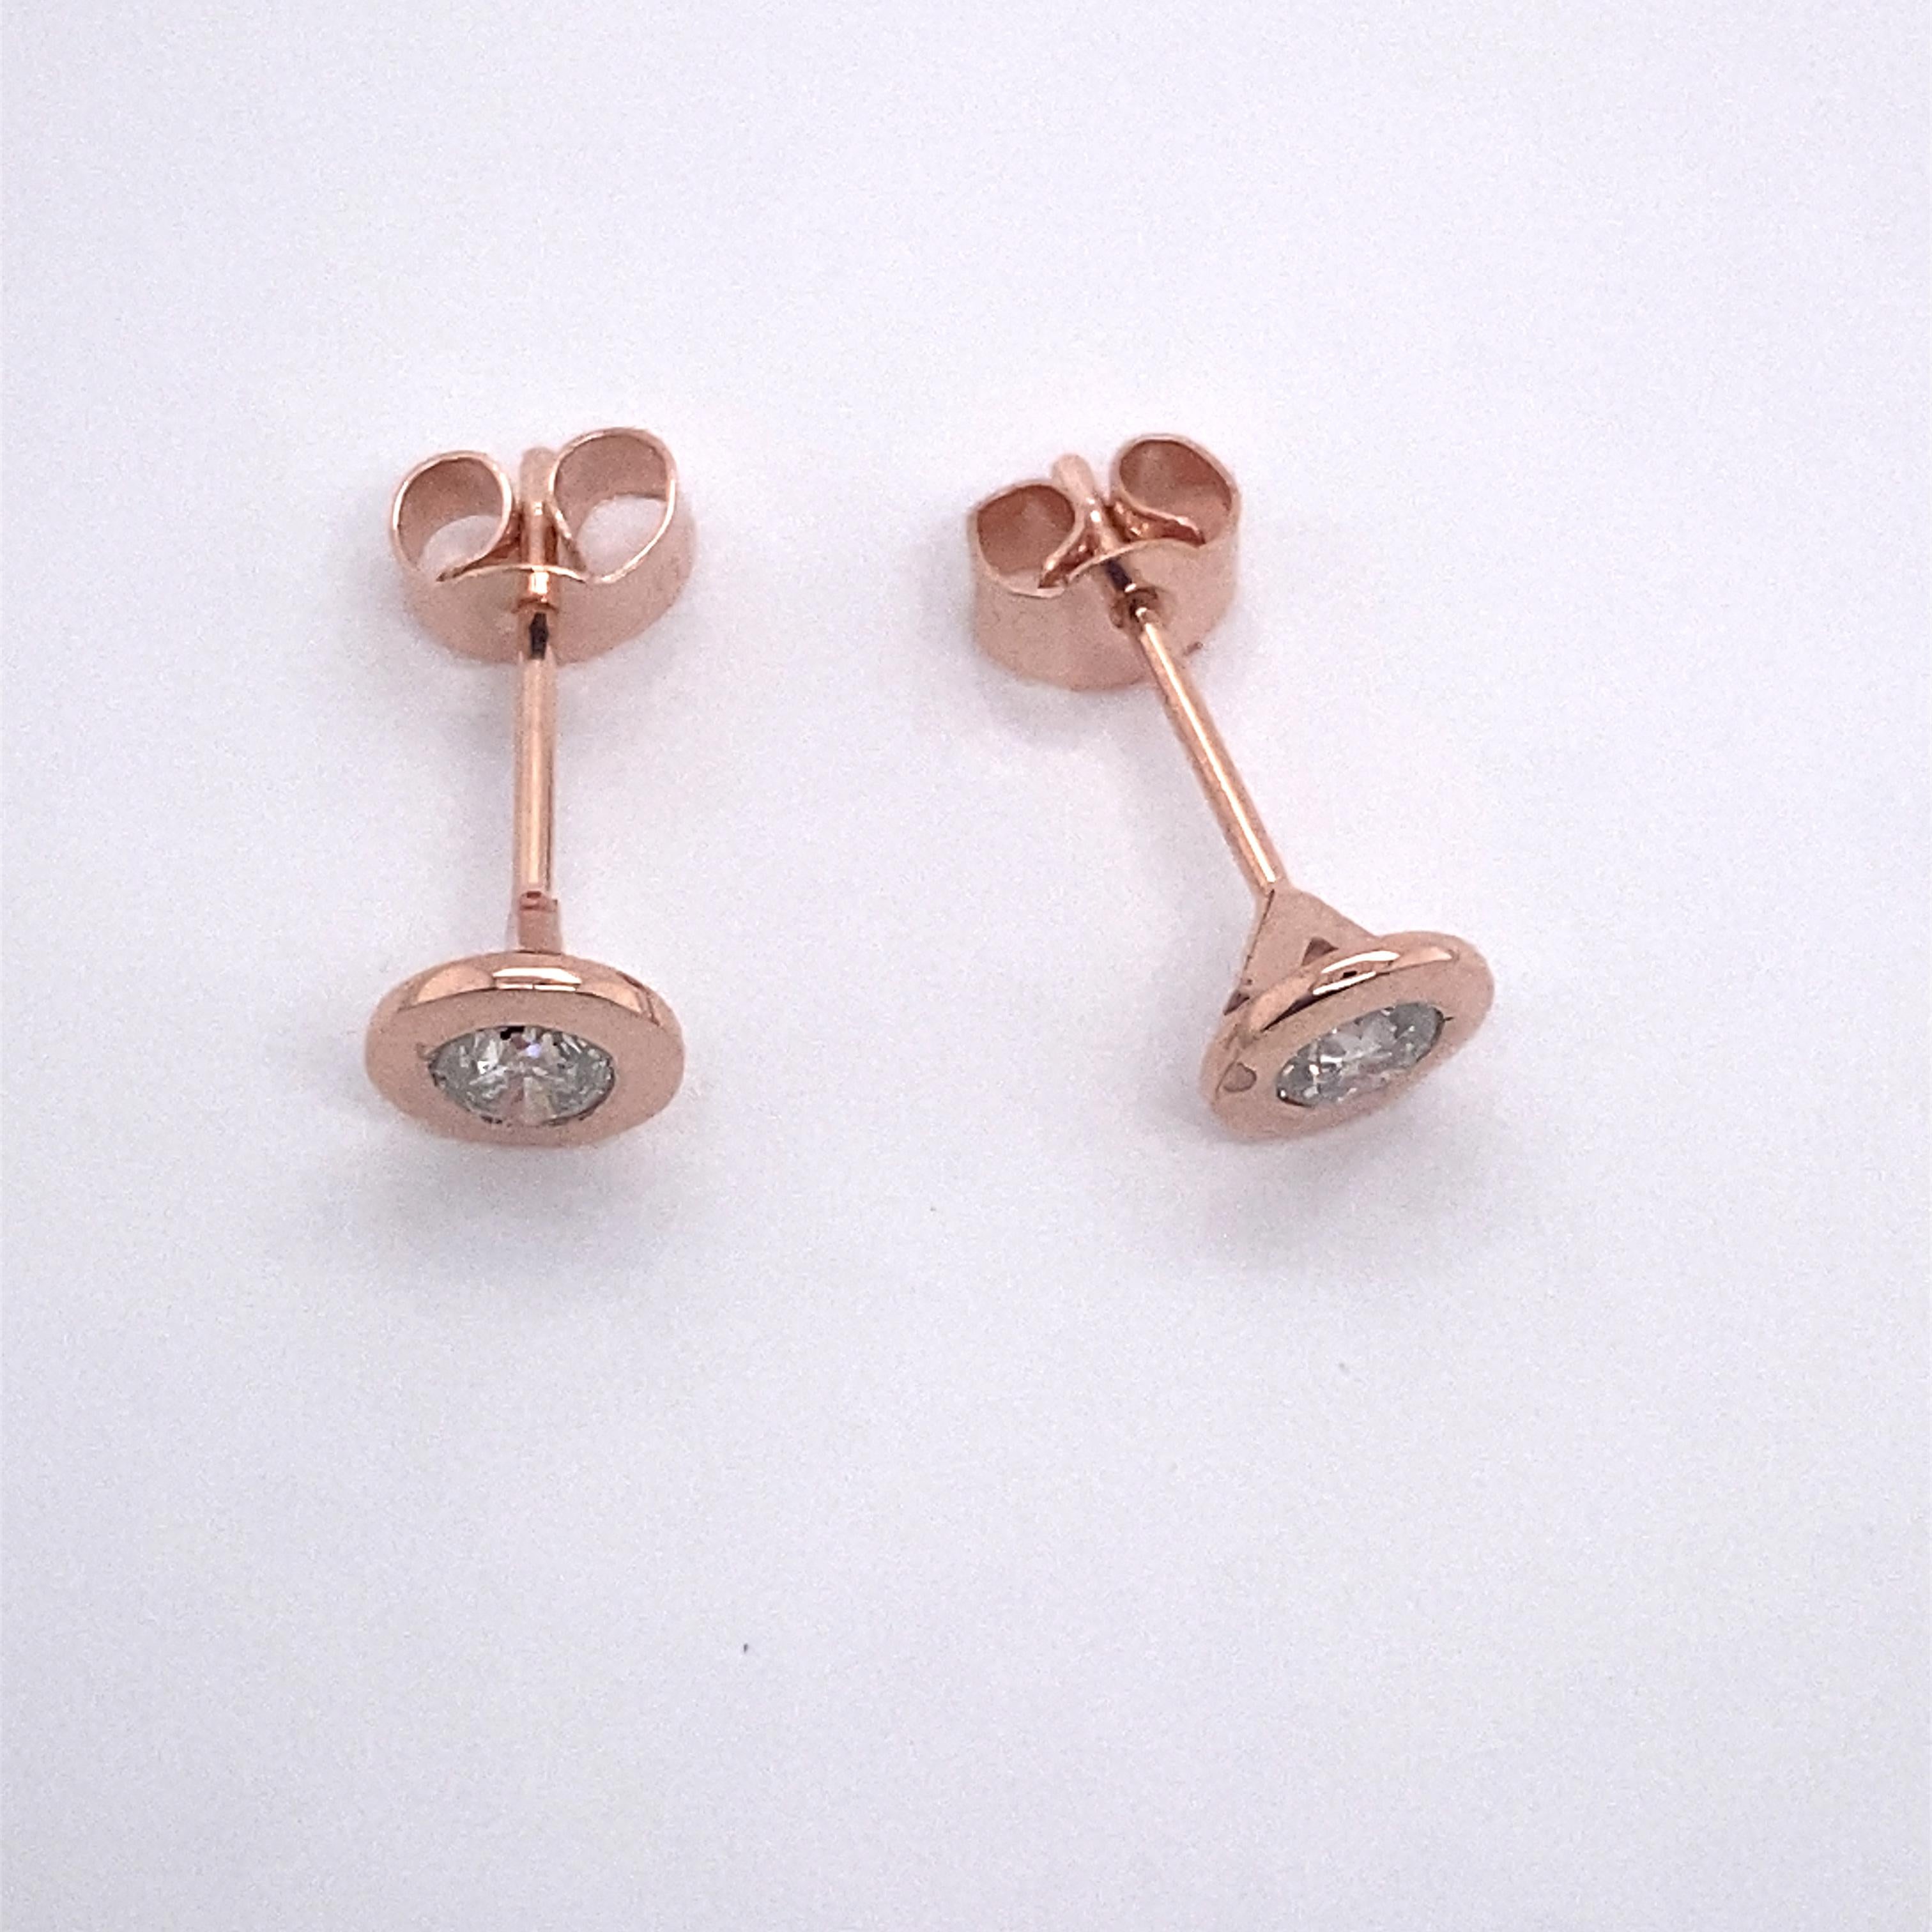 0.38ct Diamond Studs Earrings in Rubover Setting in 18ct Rose Gold In New Condition For Sale In London, GB